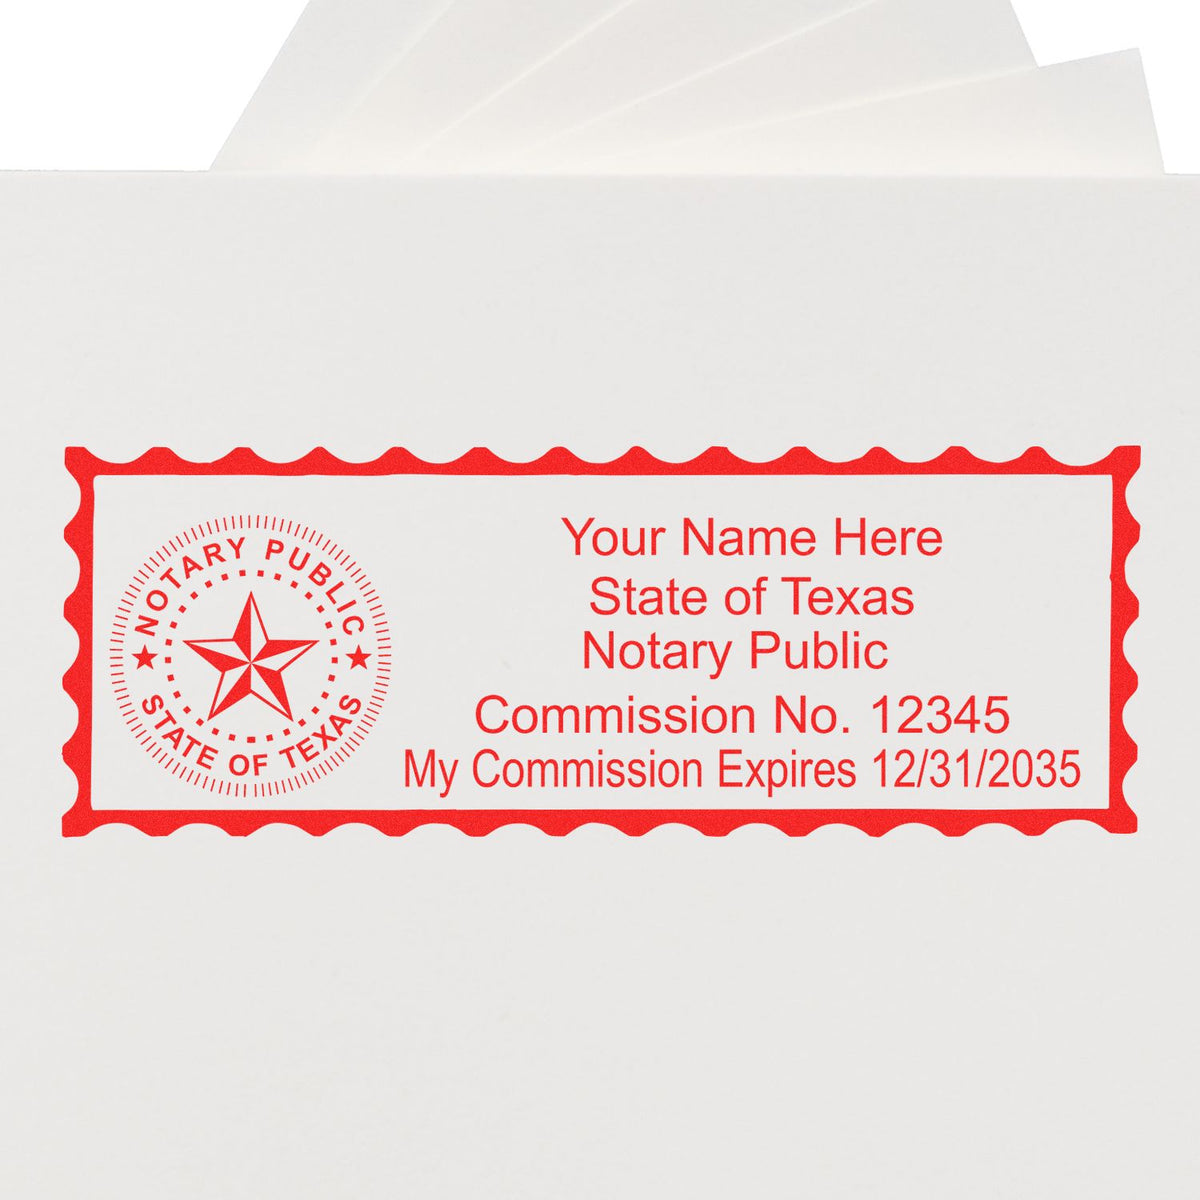 Another Example of a stamped impression of the Super Slim Texas Notary Public Stamp on a piece of office paper.